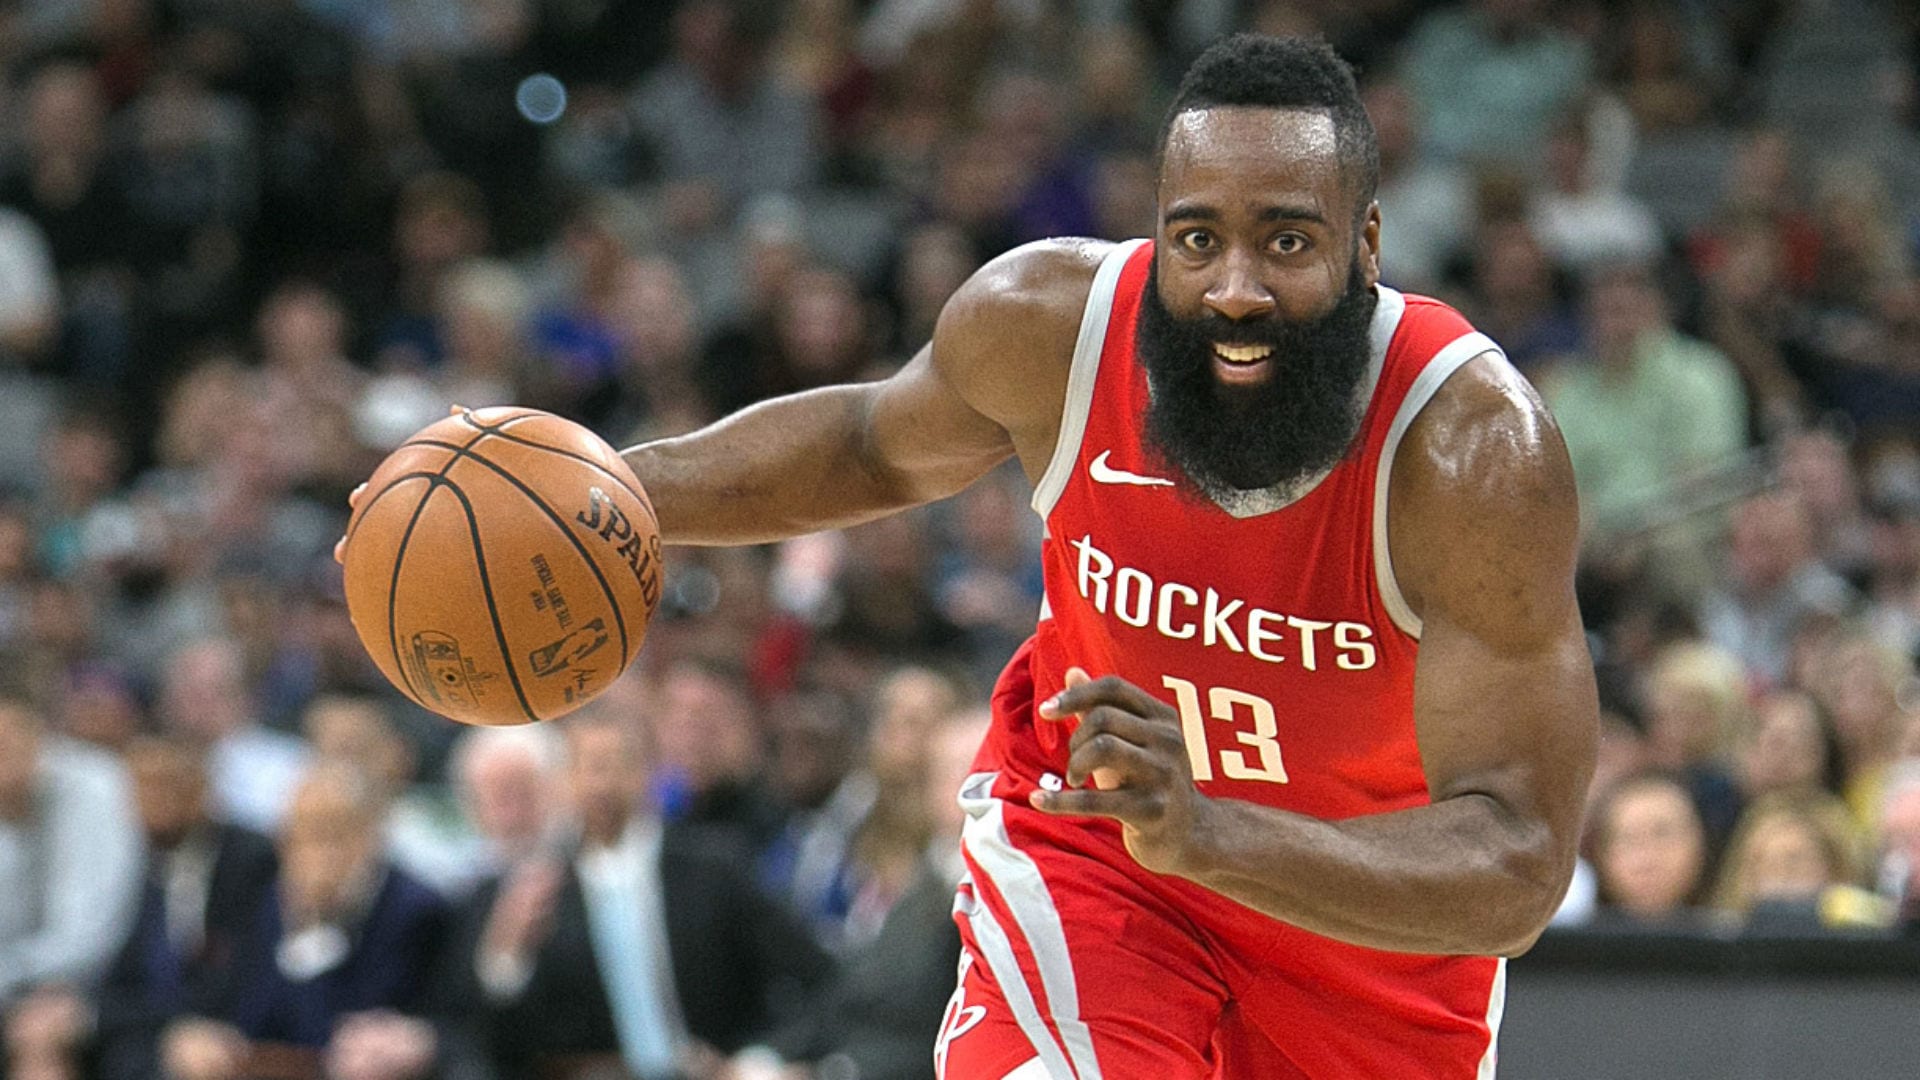 NBA Offseason Surprise: Could James Harden End Up with the Raptors or 76ers?